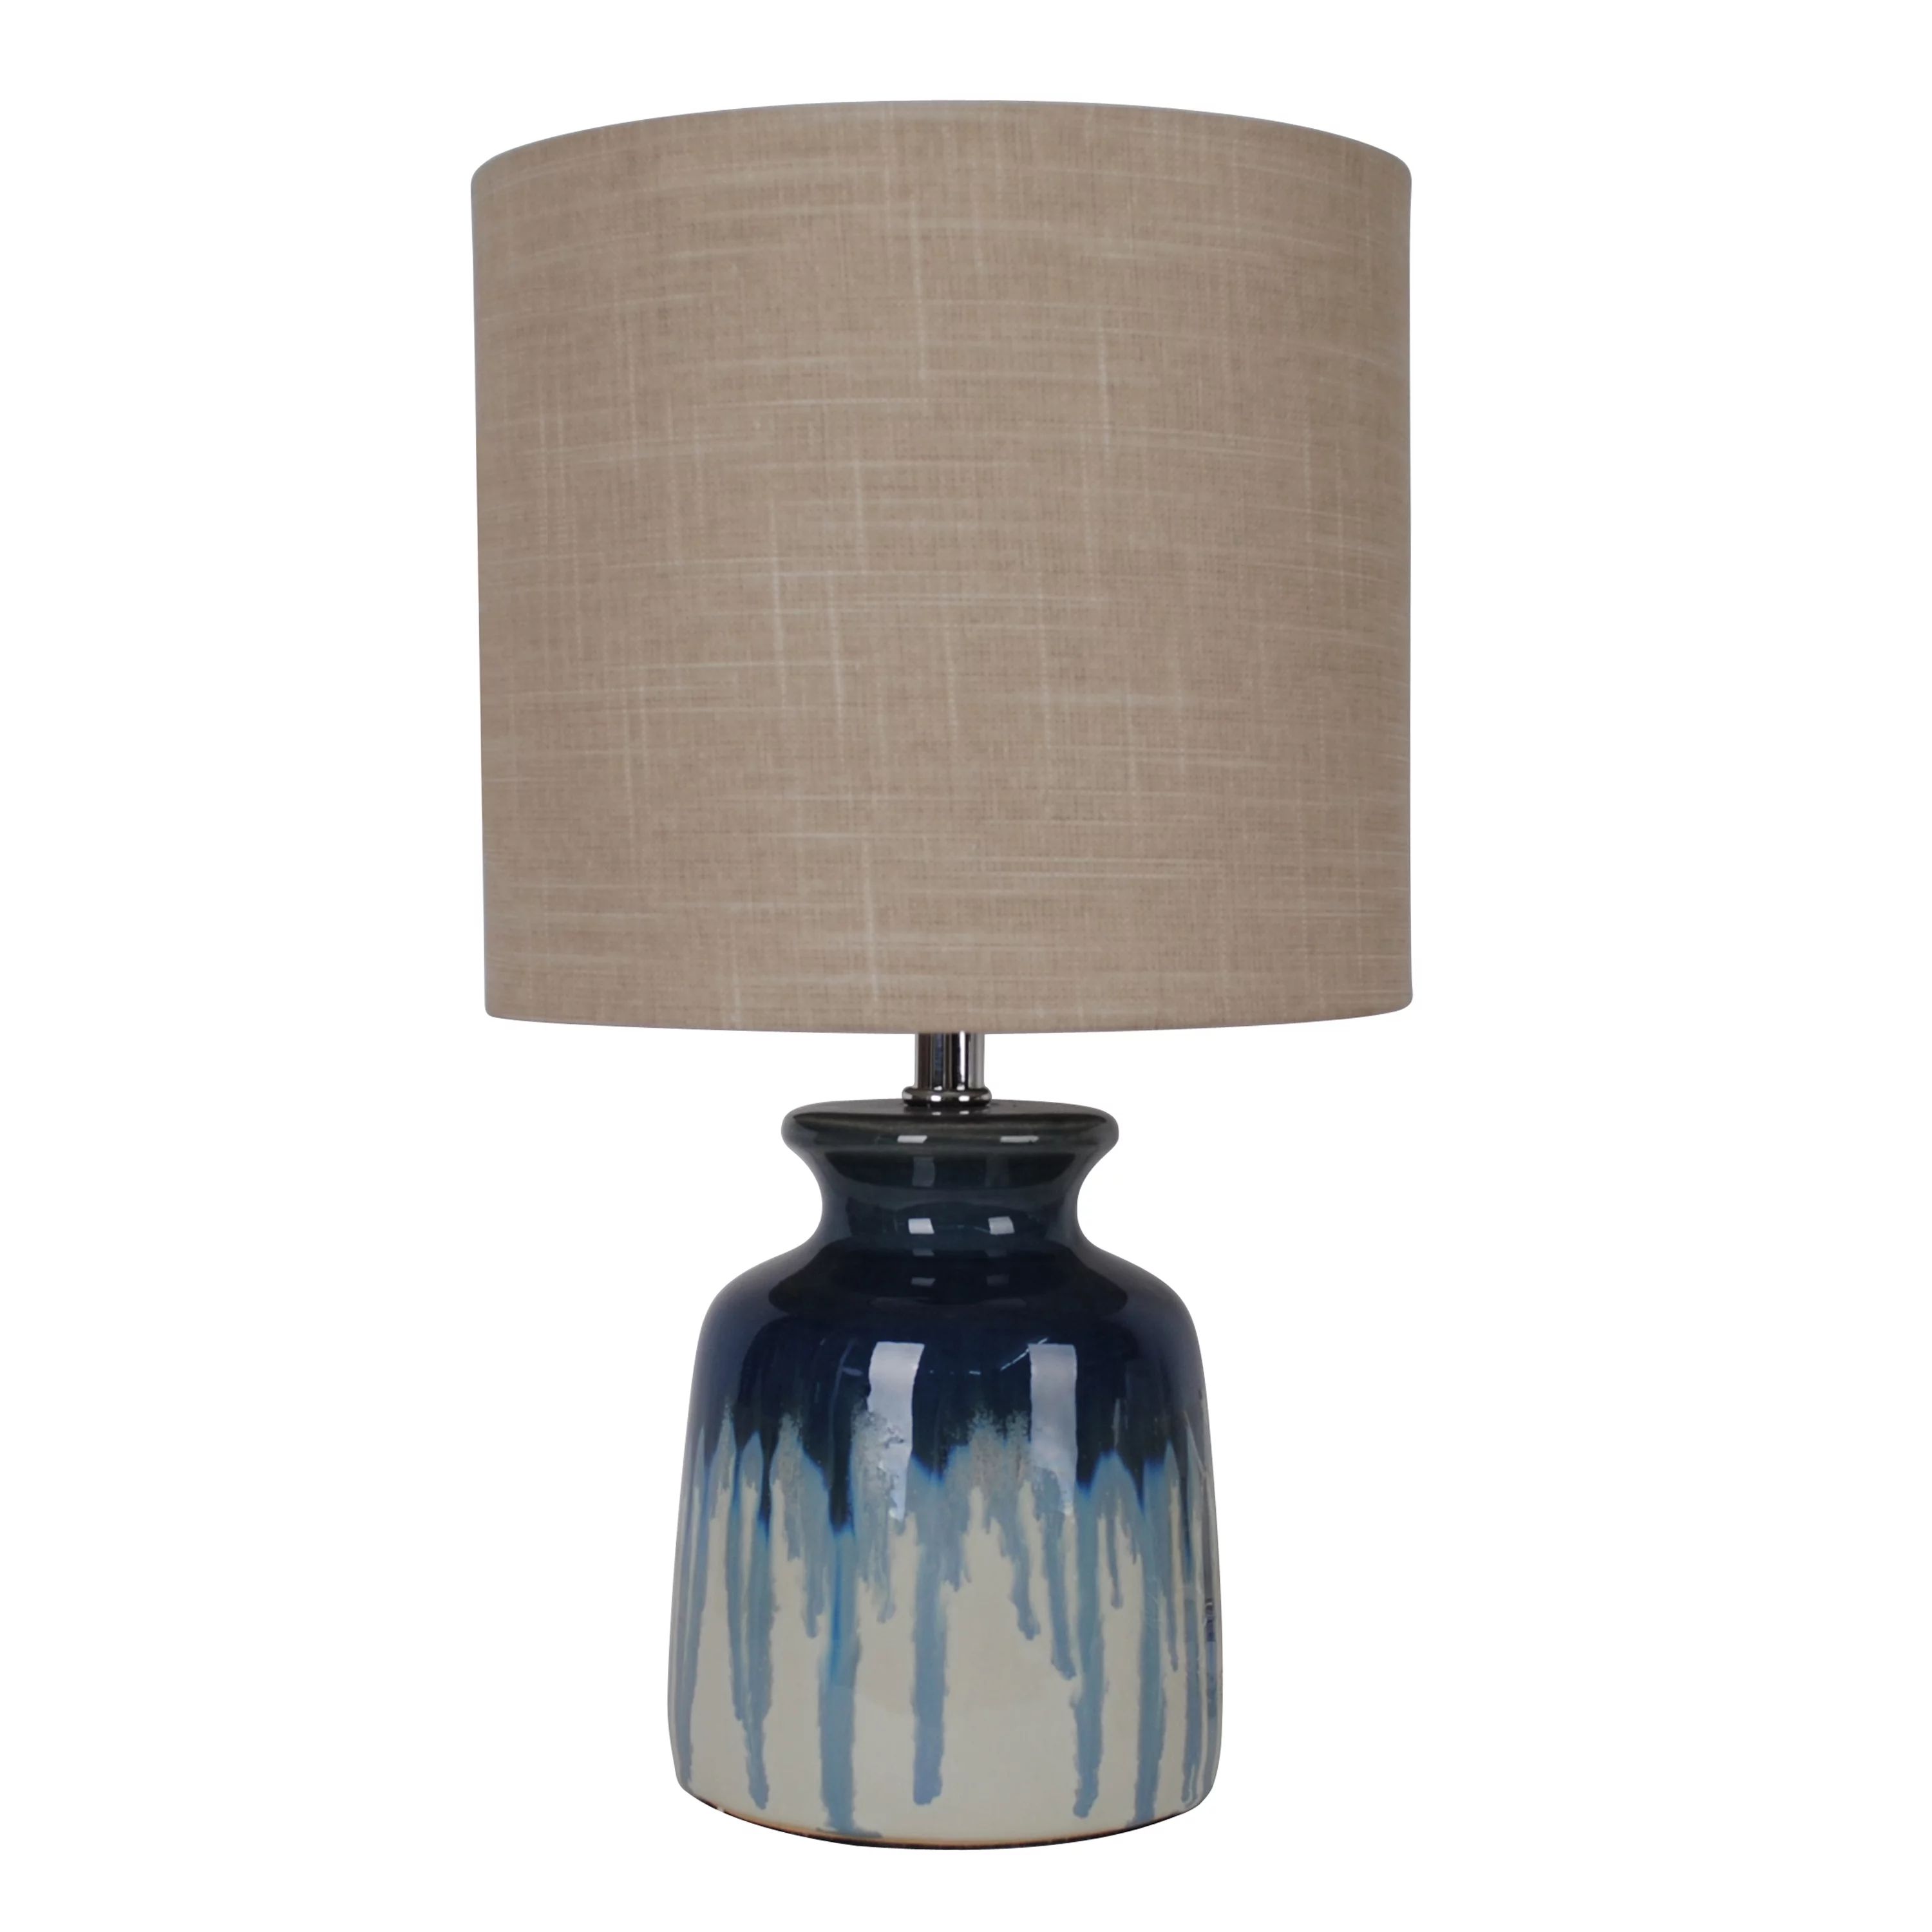 Better Homes & Gardens Ceramic Ombre Drip Table Lamp, Blue | Walmart (US)